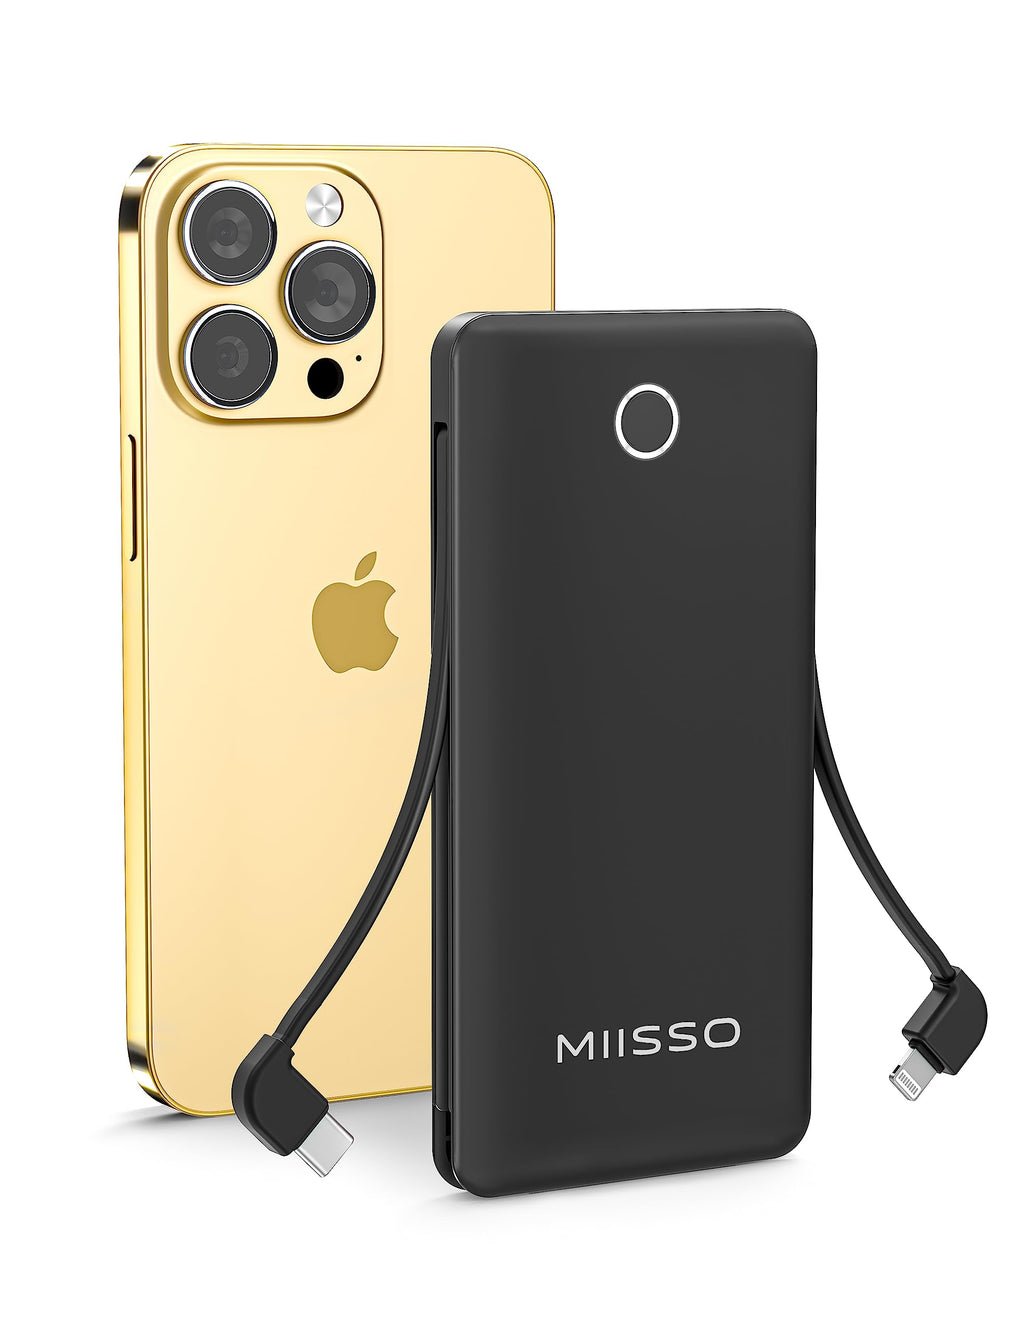 miisso 10000mah Slim Portable Charger with Built in Cable, Power Bank Travel Phone Charger External Battery Pack for Phones, 4 Output USB C Cords Clutch Charger Compatible with iPhone, Samsung, Black